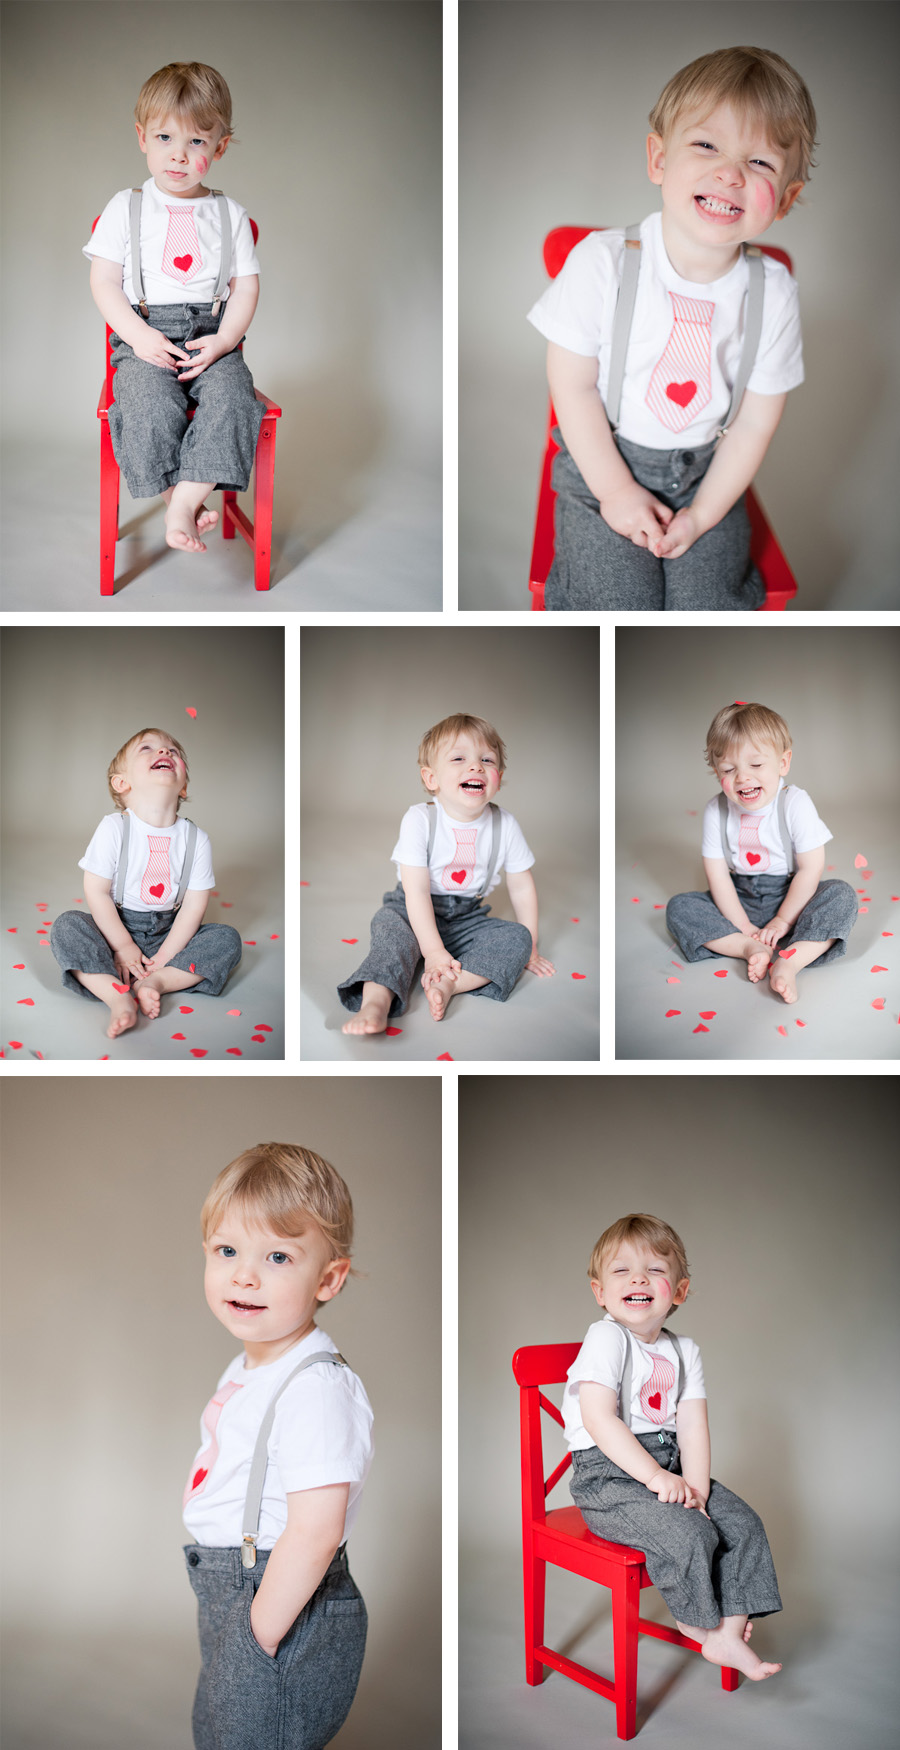 MIll Creek Child and Family Photographer does Valentine's Day session.